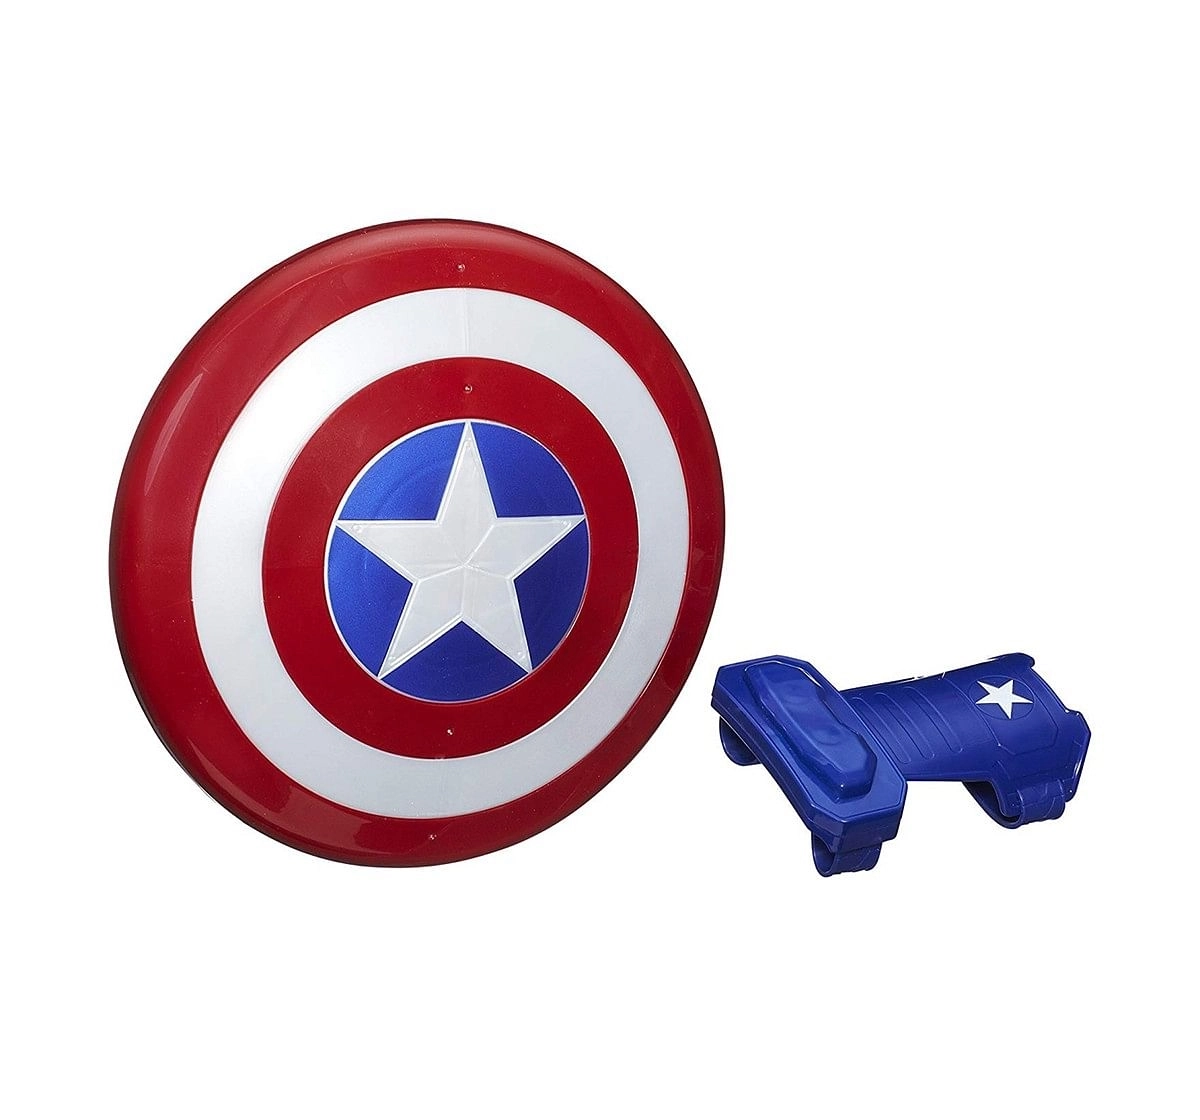 Marvel Avengers Captain America Magnetic Shield And Gauntlet, Multi Color Action Figure Play Sets for Kids age 5Y+ 